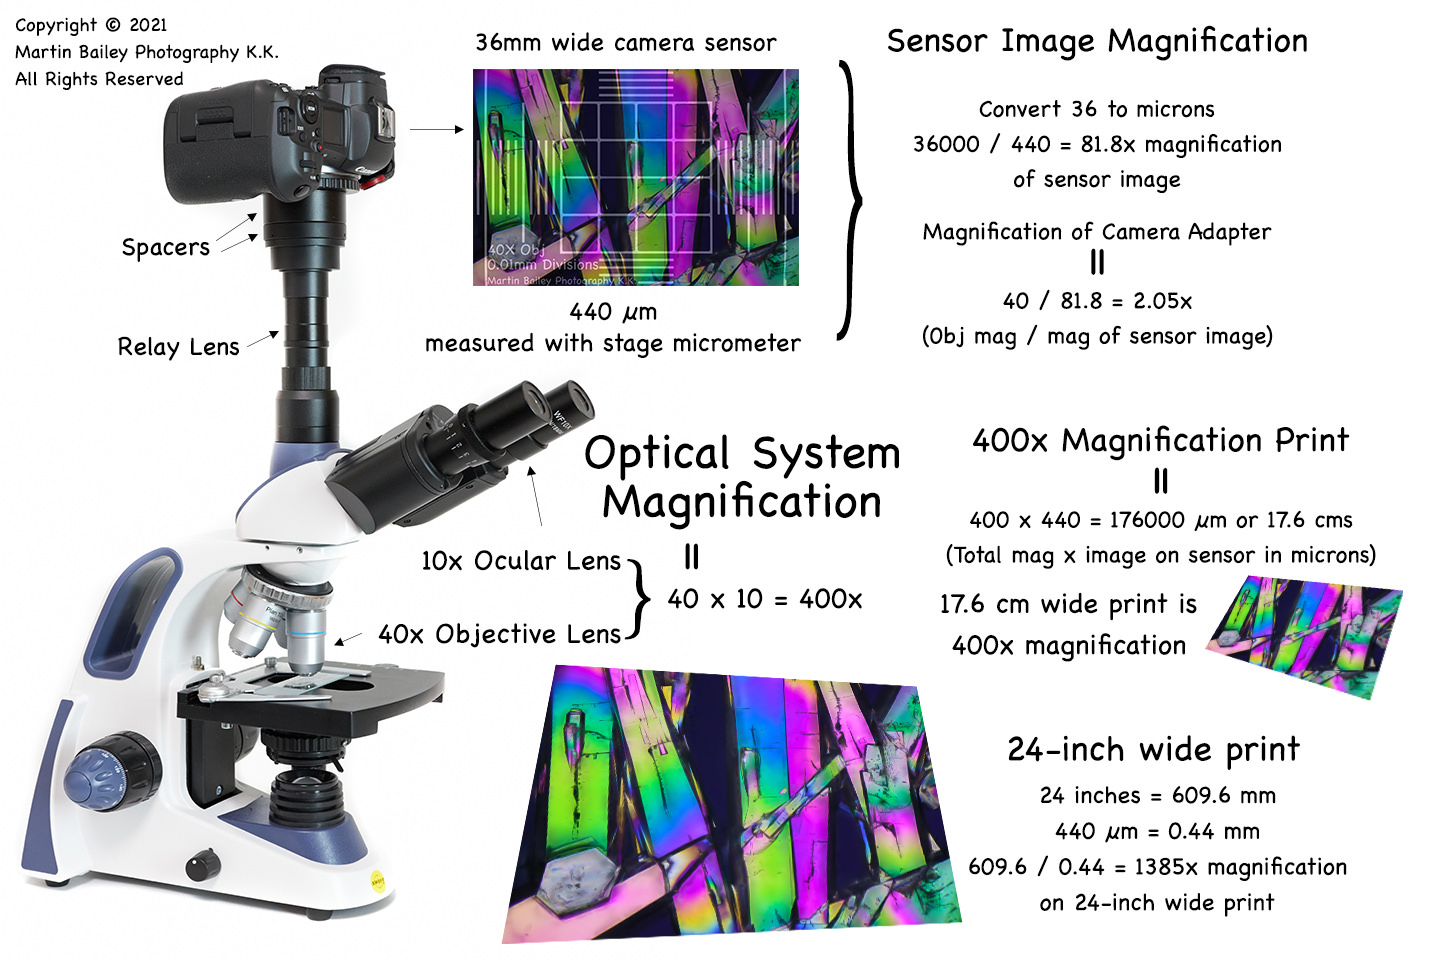 USB cameras for microscopy imaging: use the full microscope power